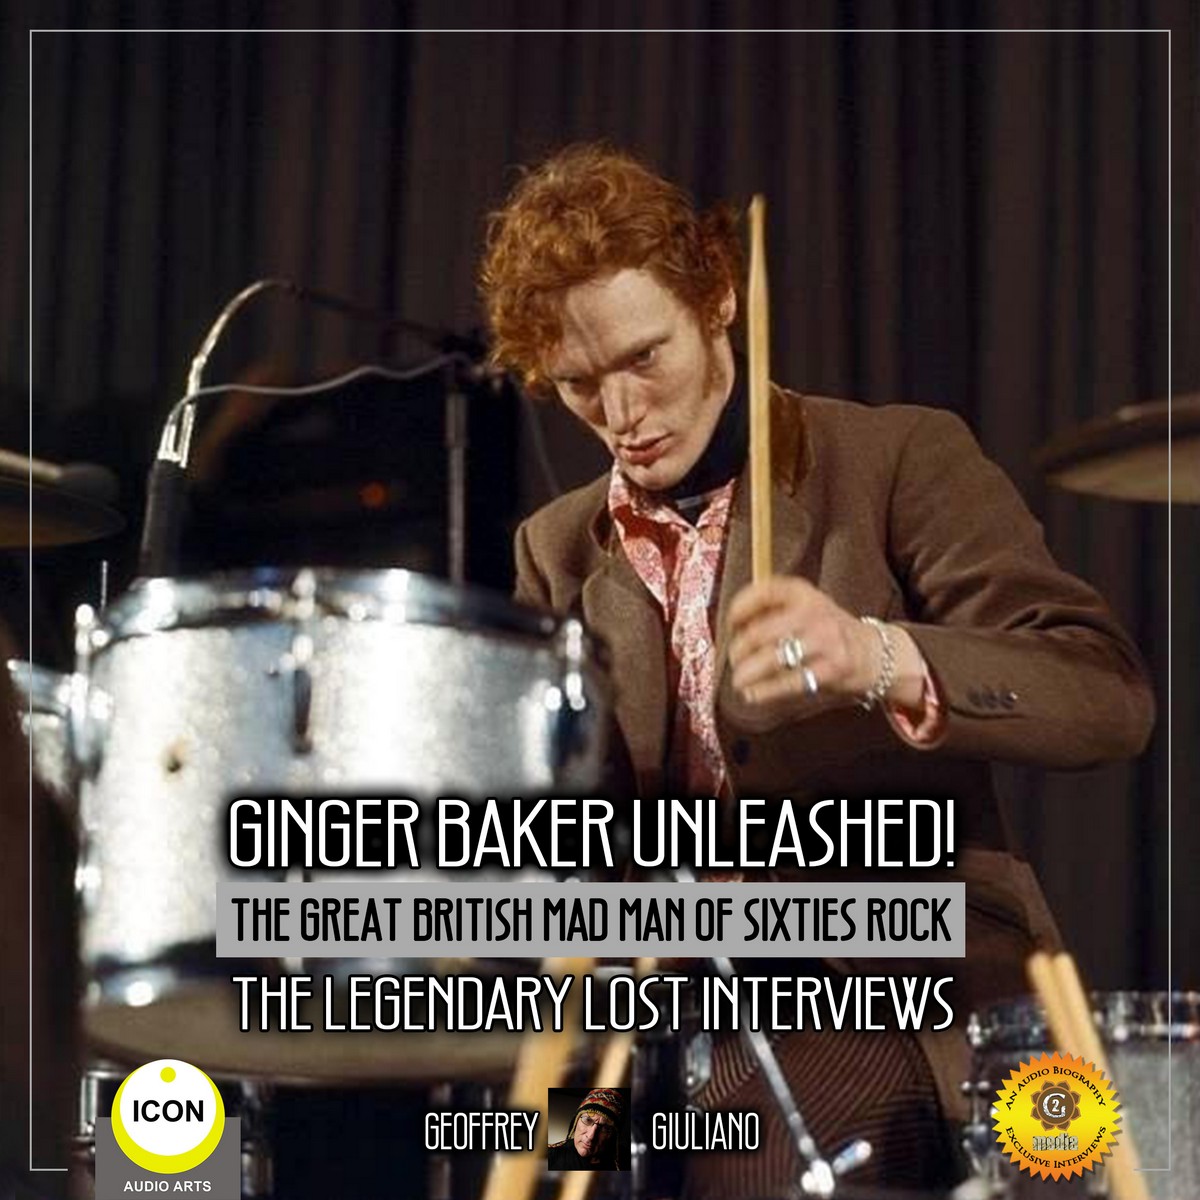 Ginger Baker Unleashed! The Great British Mad Man Of Sixties Rock- The Legendary Lost Interviews